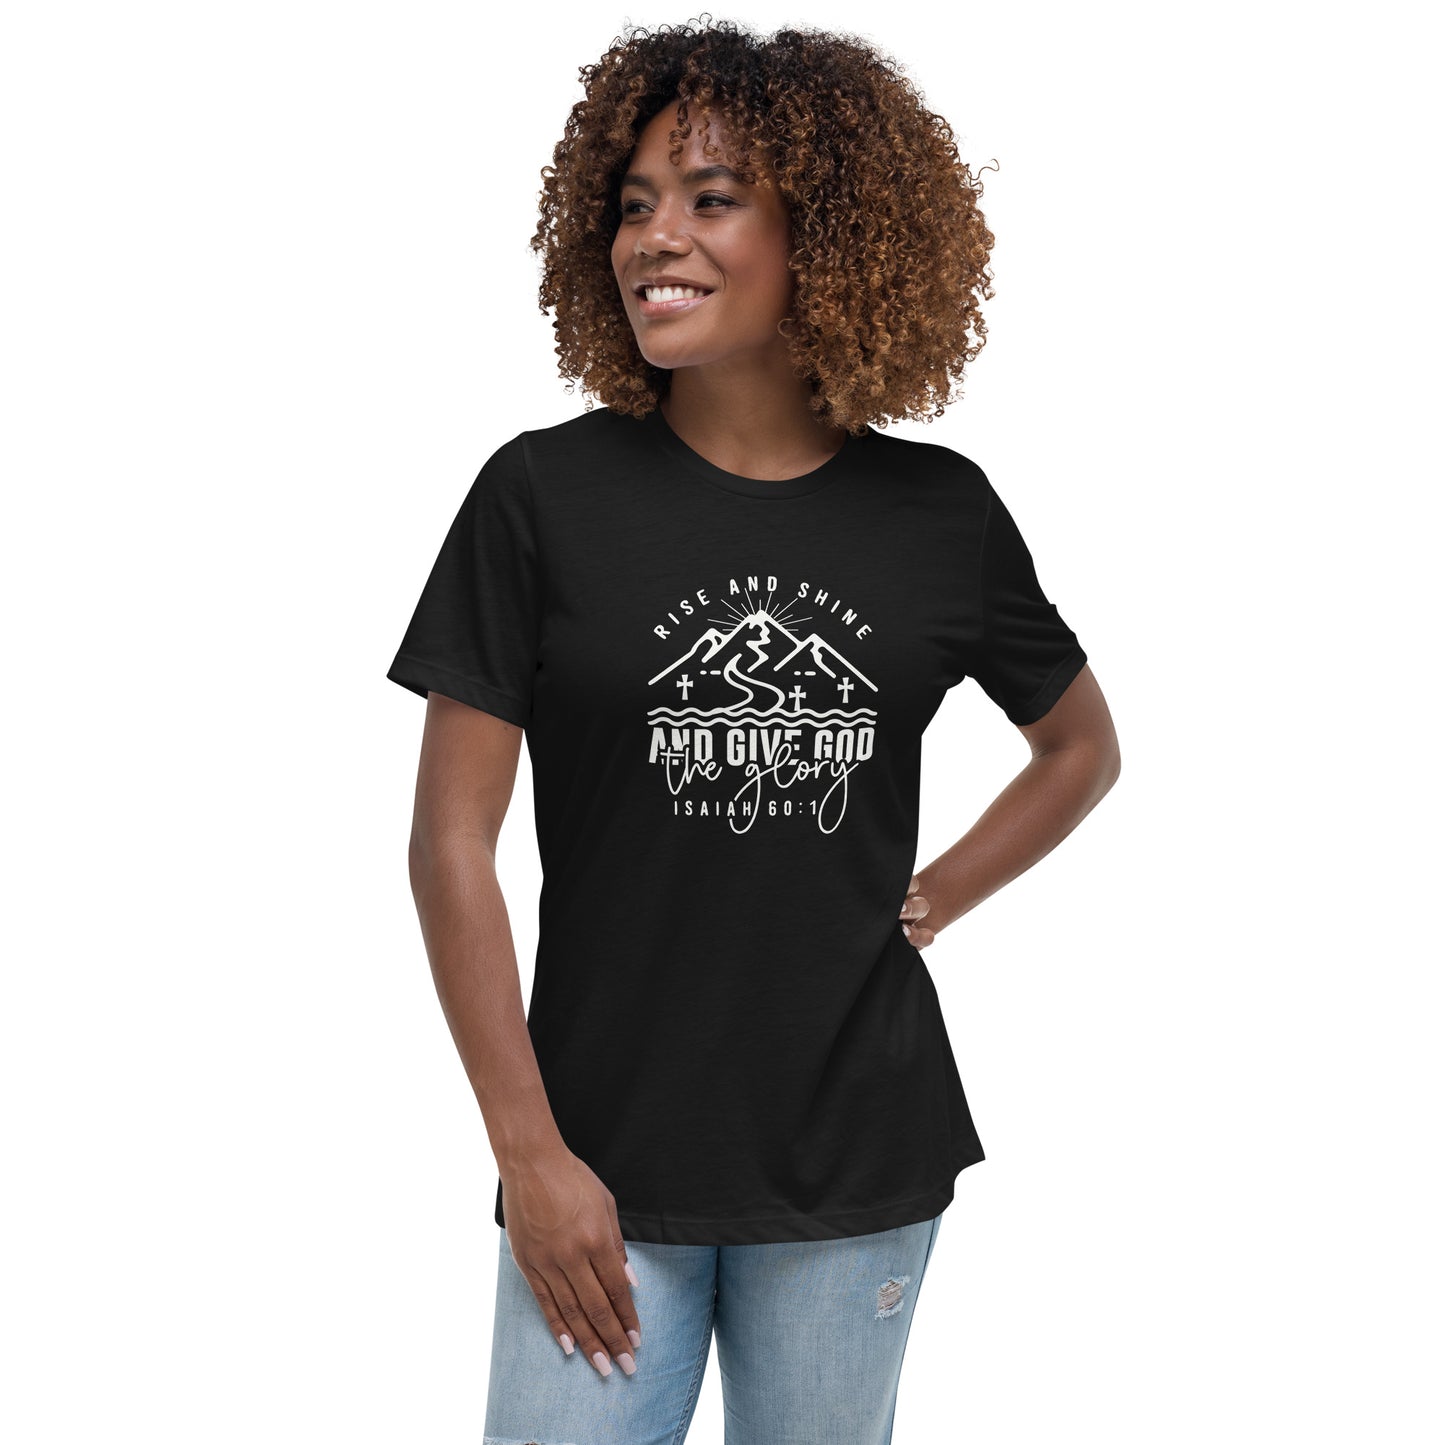 Give Glory to God | Women's Relaxed T-Shirt